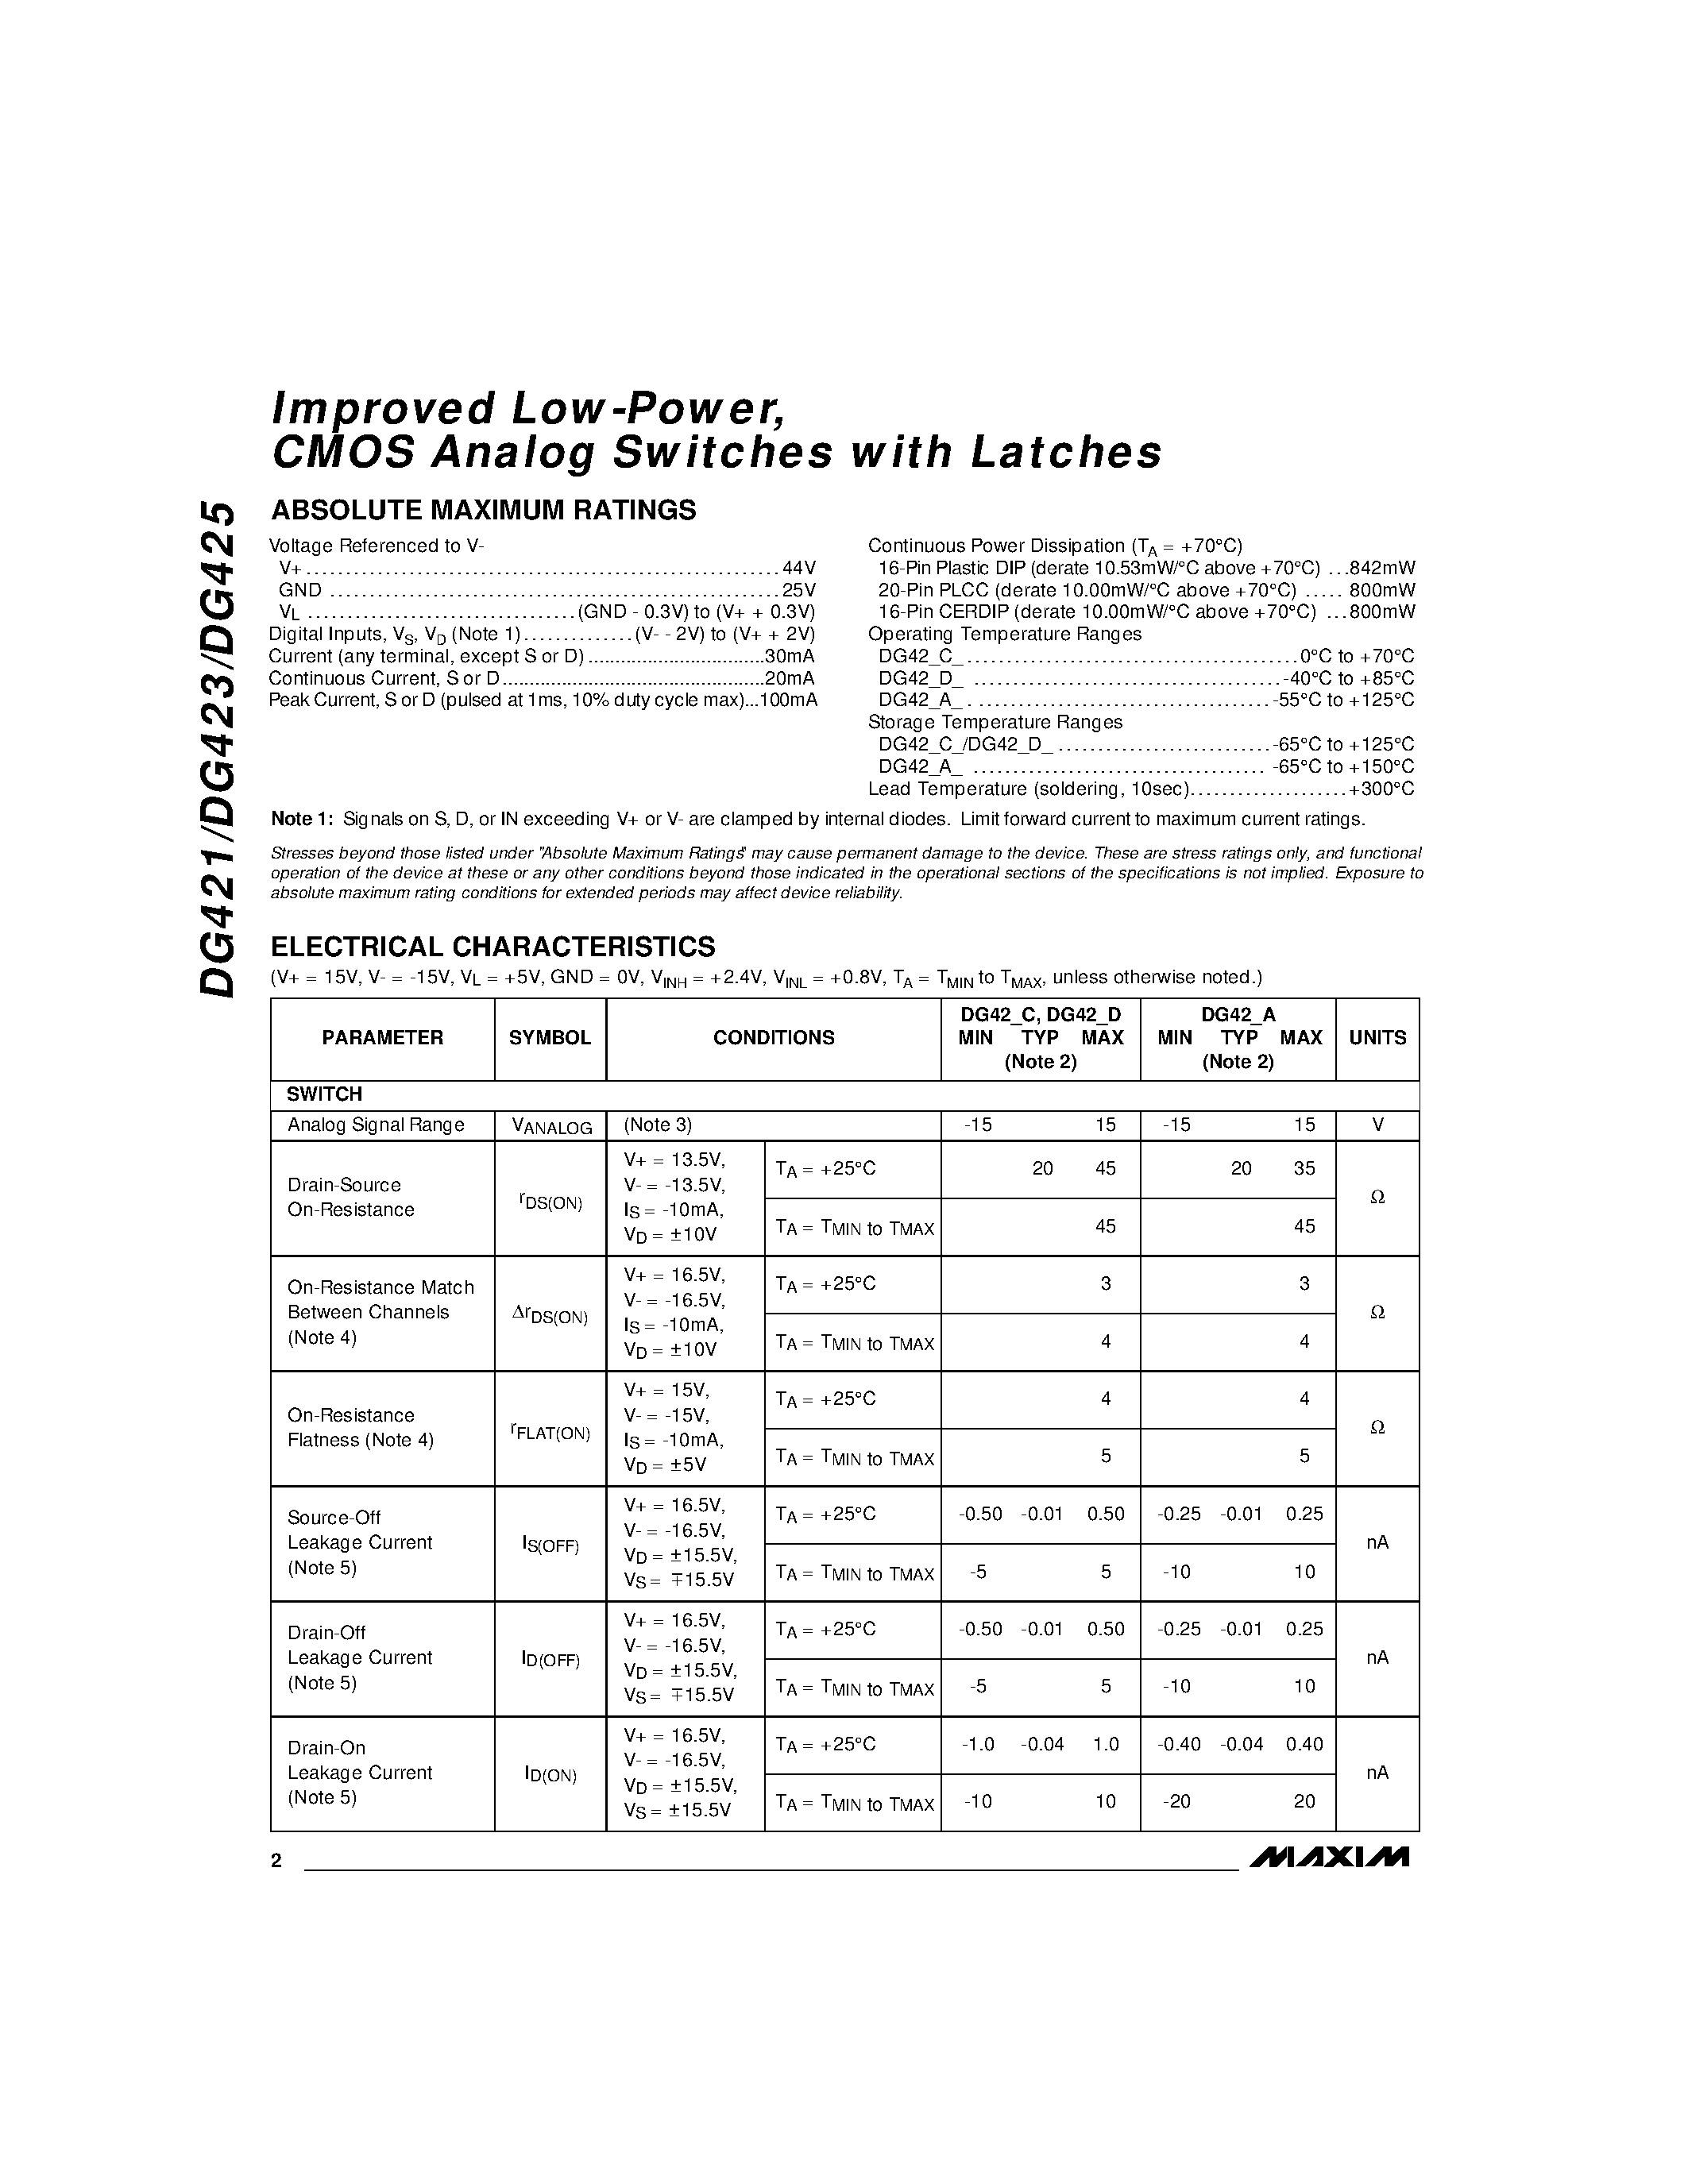 Datasheet DG425C/D - Improved Low-Power / CMOS Analog Switches with Latches page 2